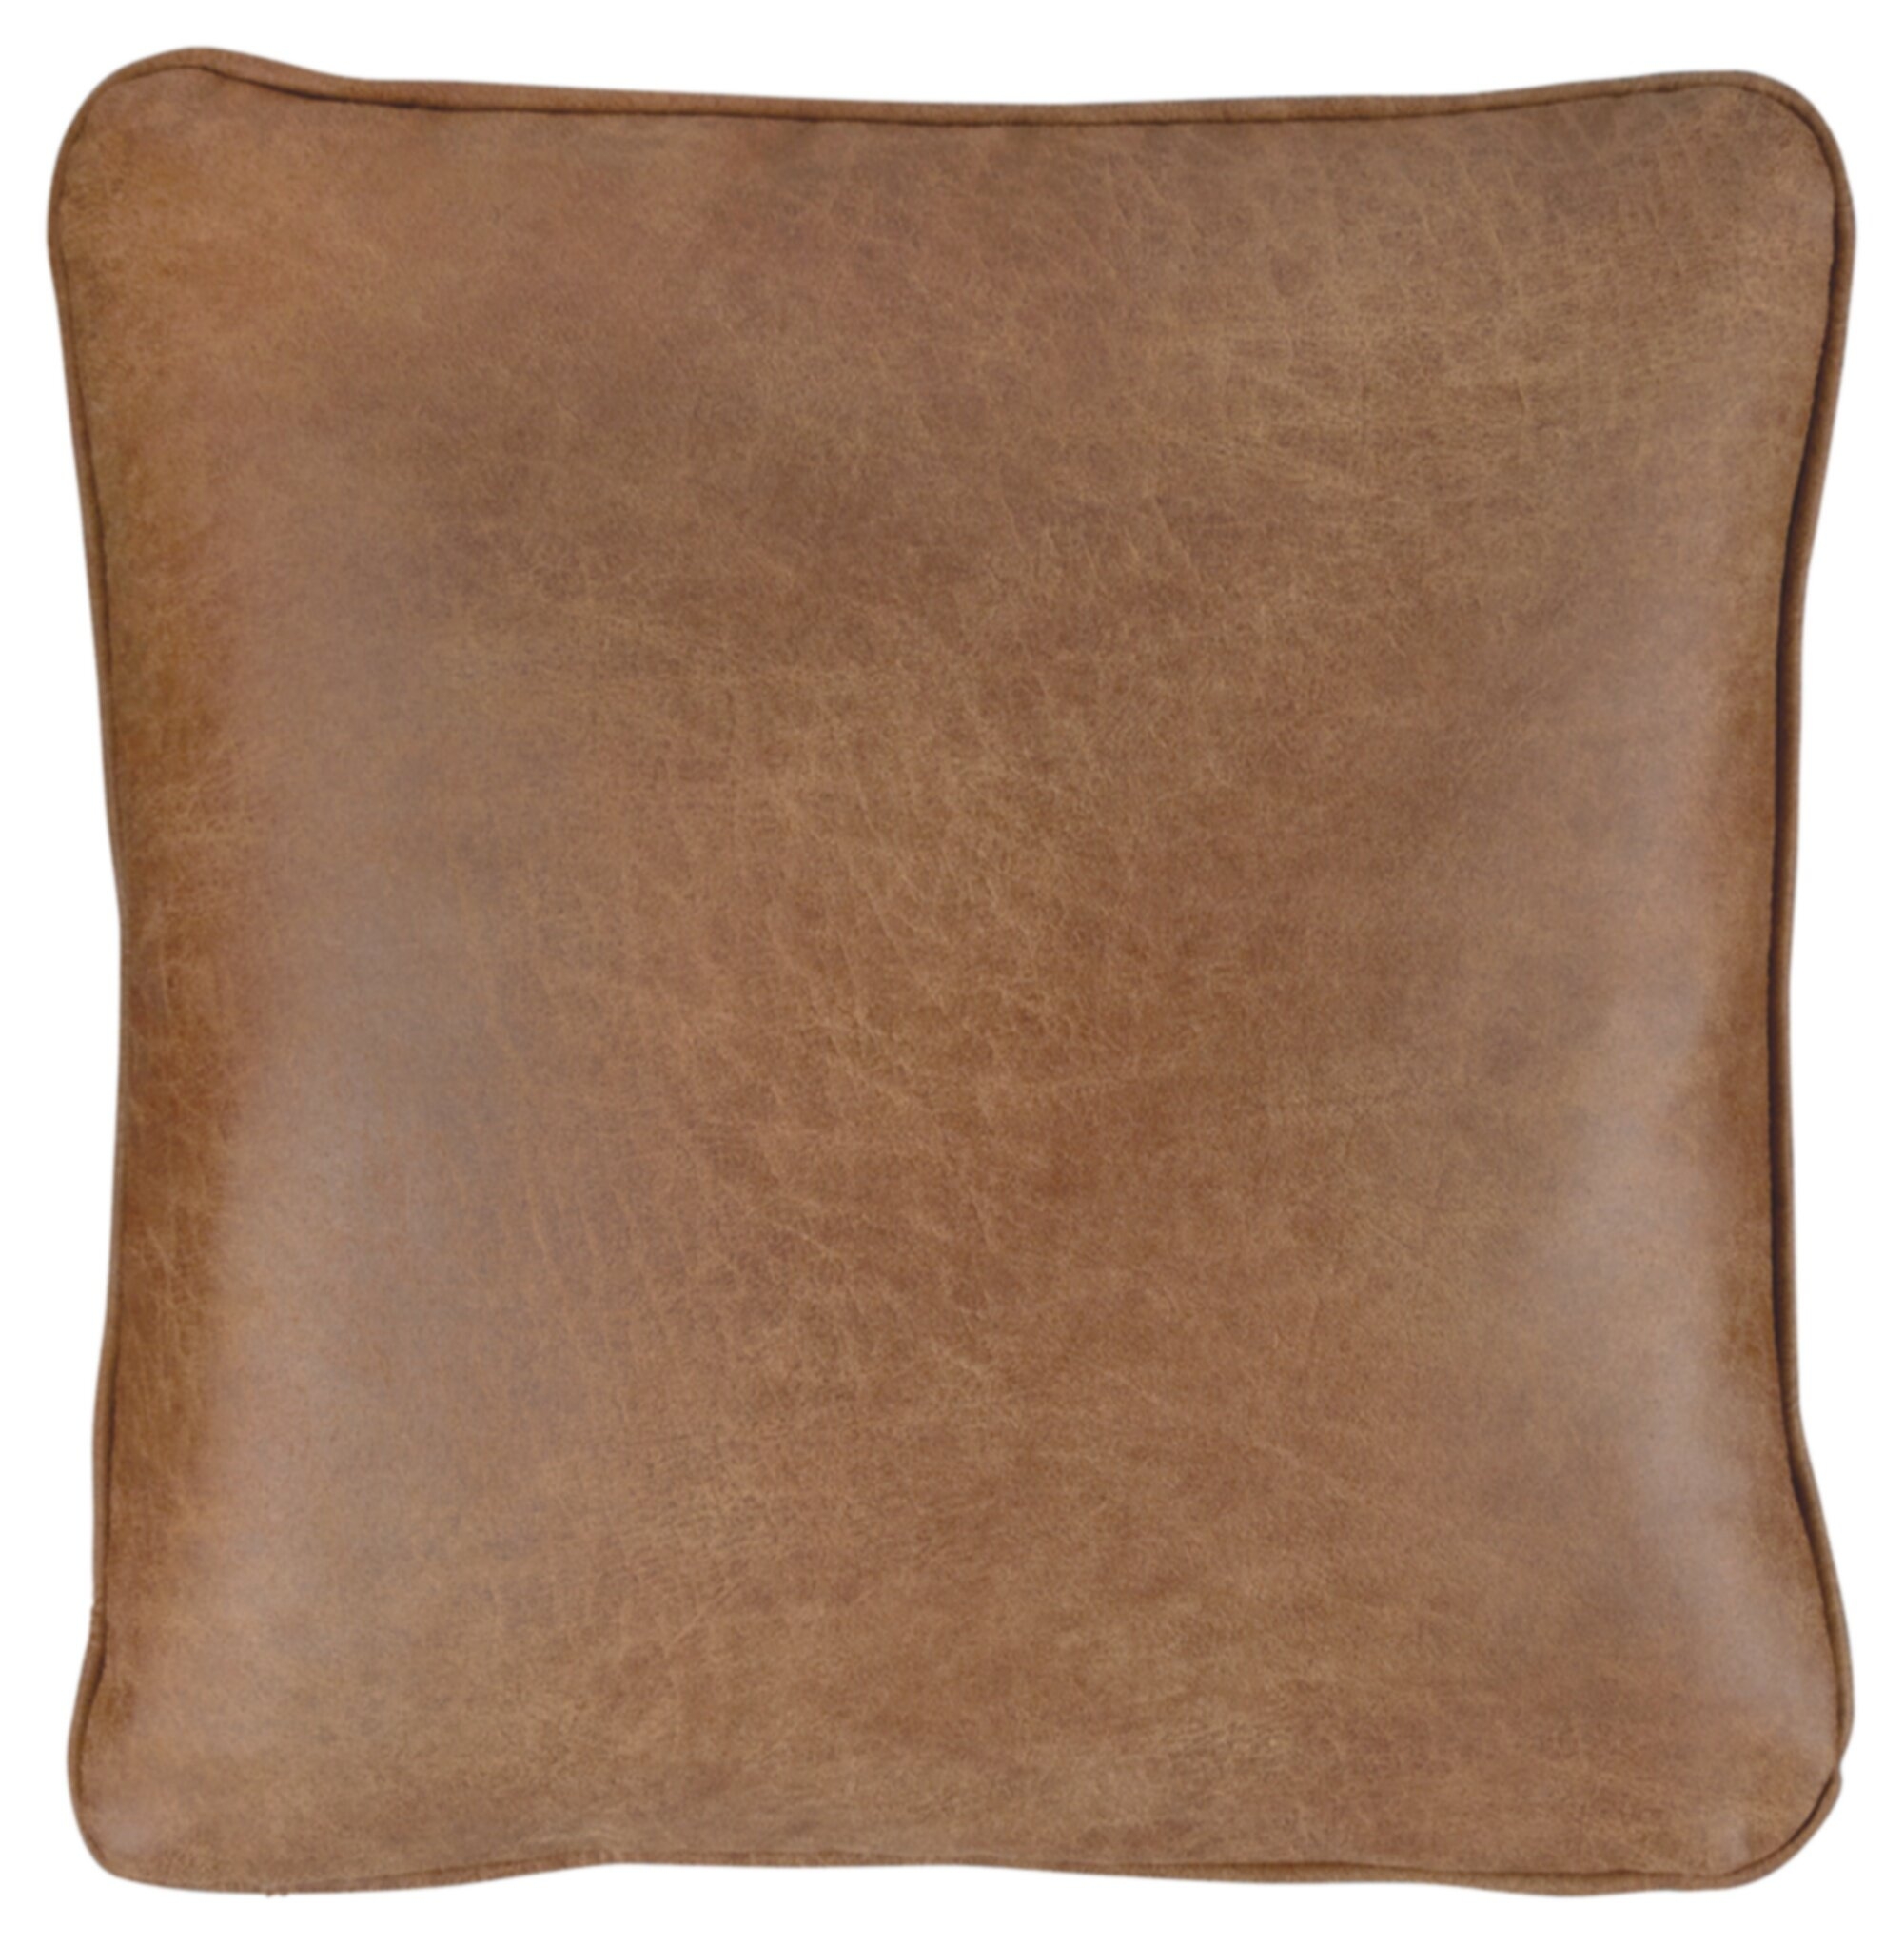 Desoto Square Faux Leather Pillow Cover and Insert RESTOCK IN APR 7,2021. - Image 0